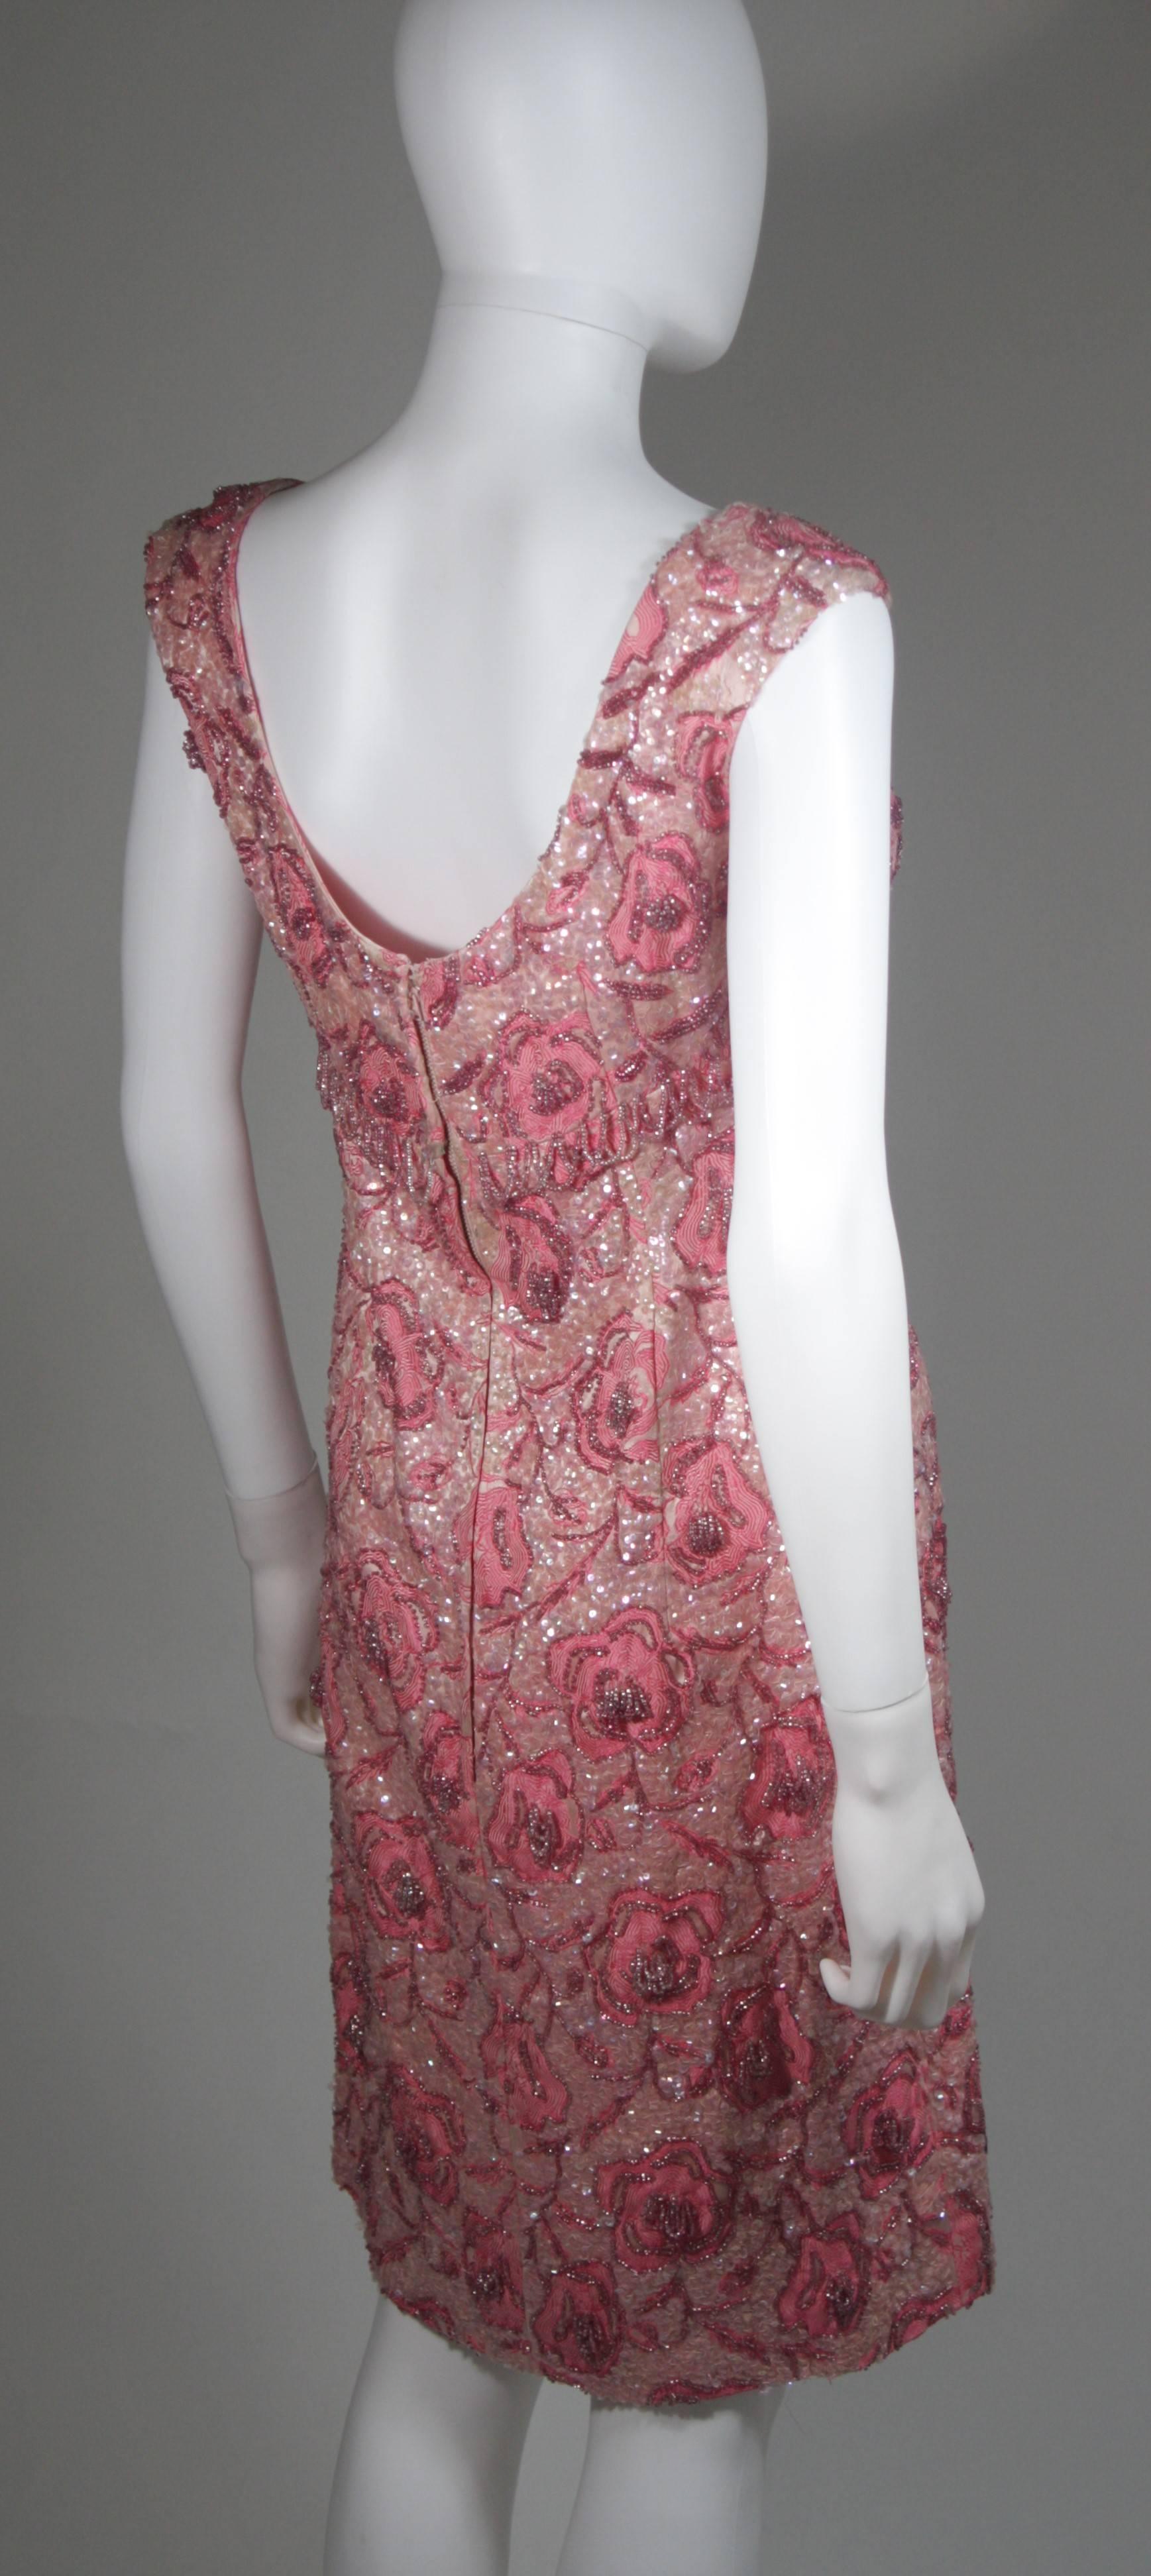 1960's SAKS 5TH AVE Pink Floral Brocade Hand Beaded Cocktail Dress Sz 4 For Sale 1